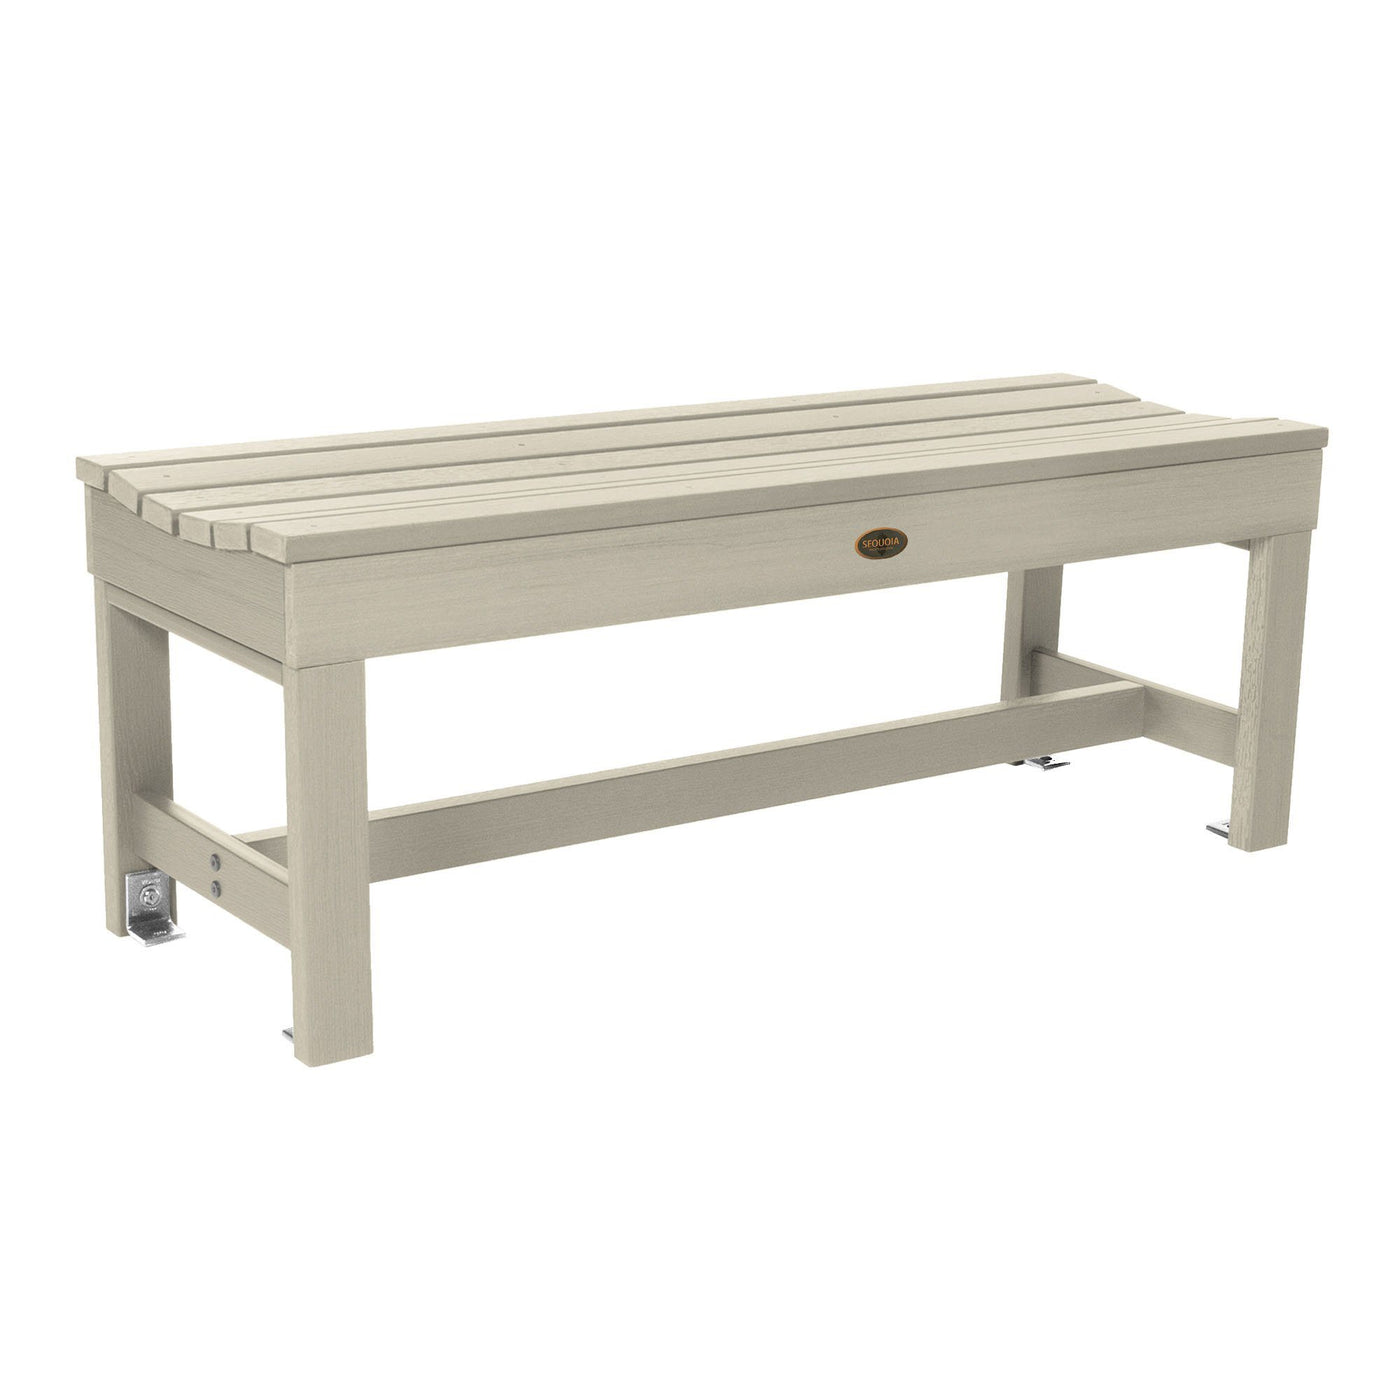 Commercial Grade "Weldon" 4ft Backless Bench Sequoia Professional Whitewash 